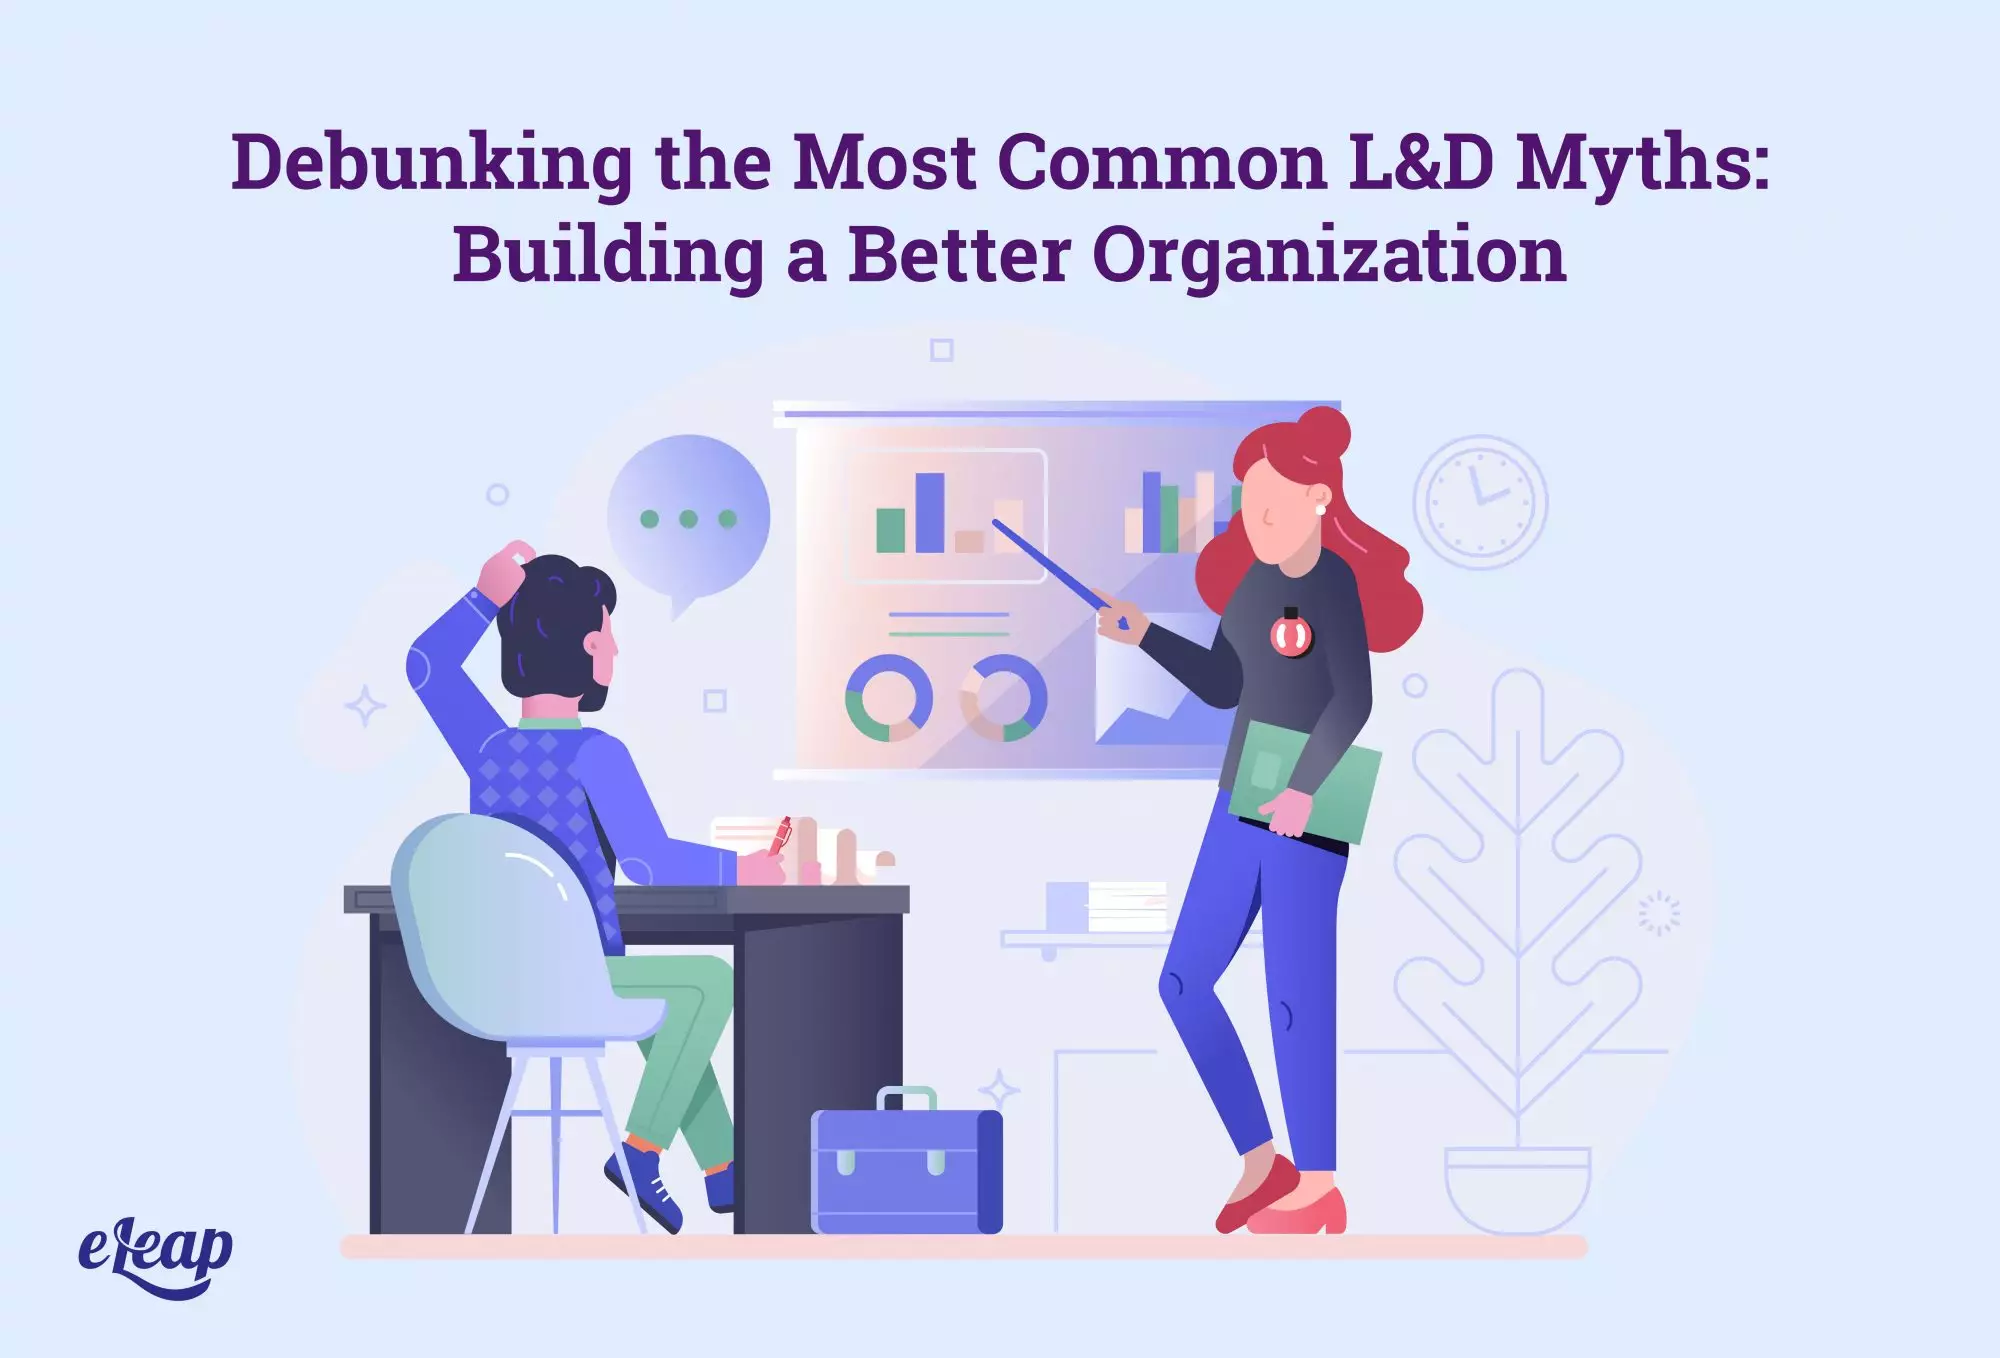 Debunking the Most Common L&D Myths: Building a Better Organization